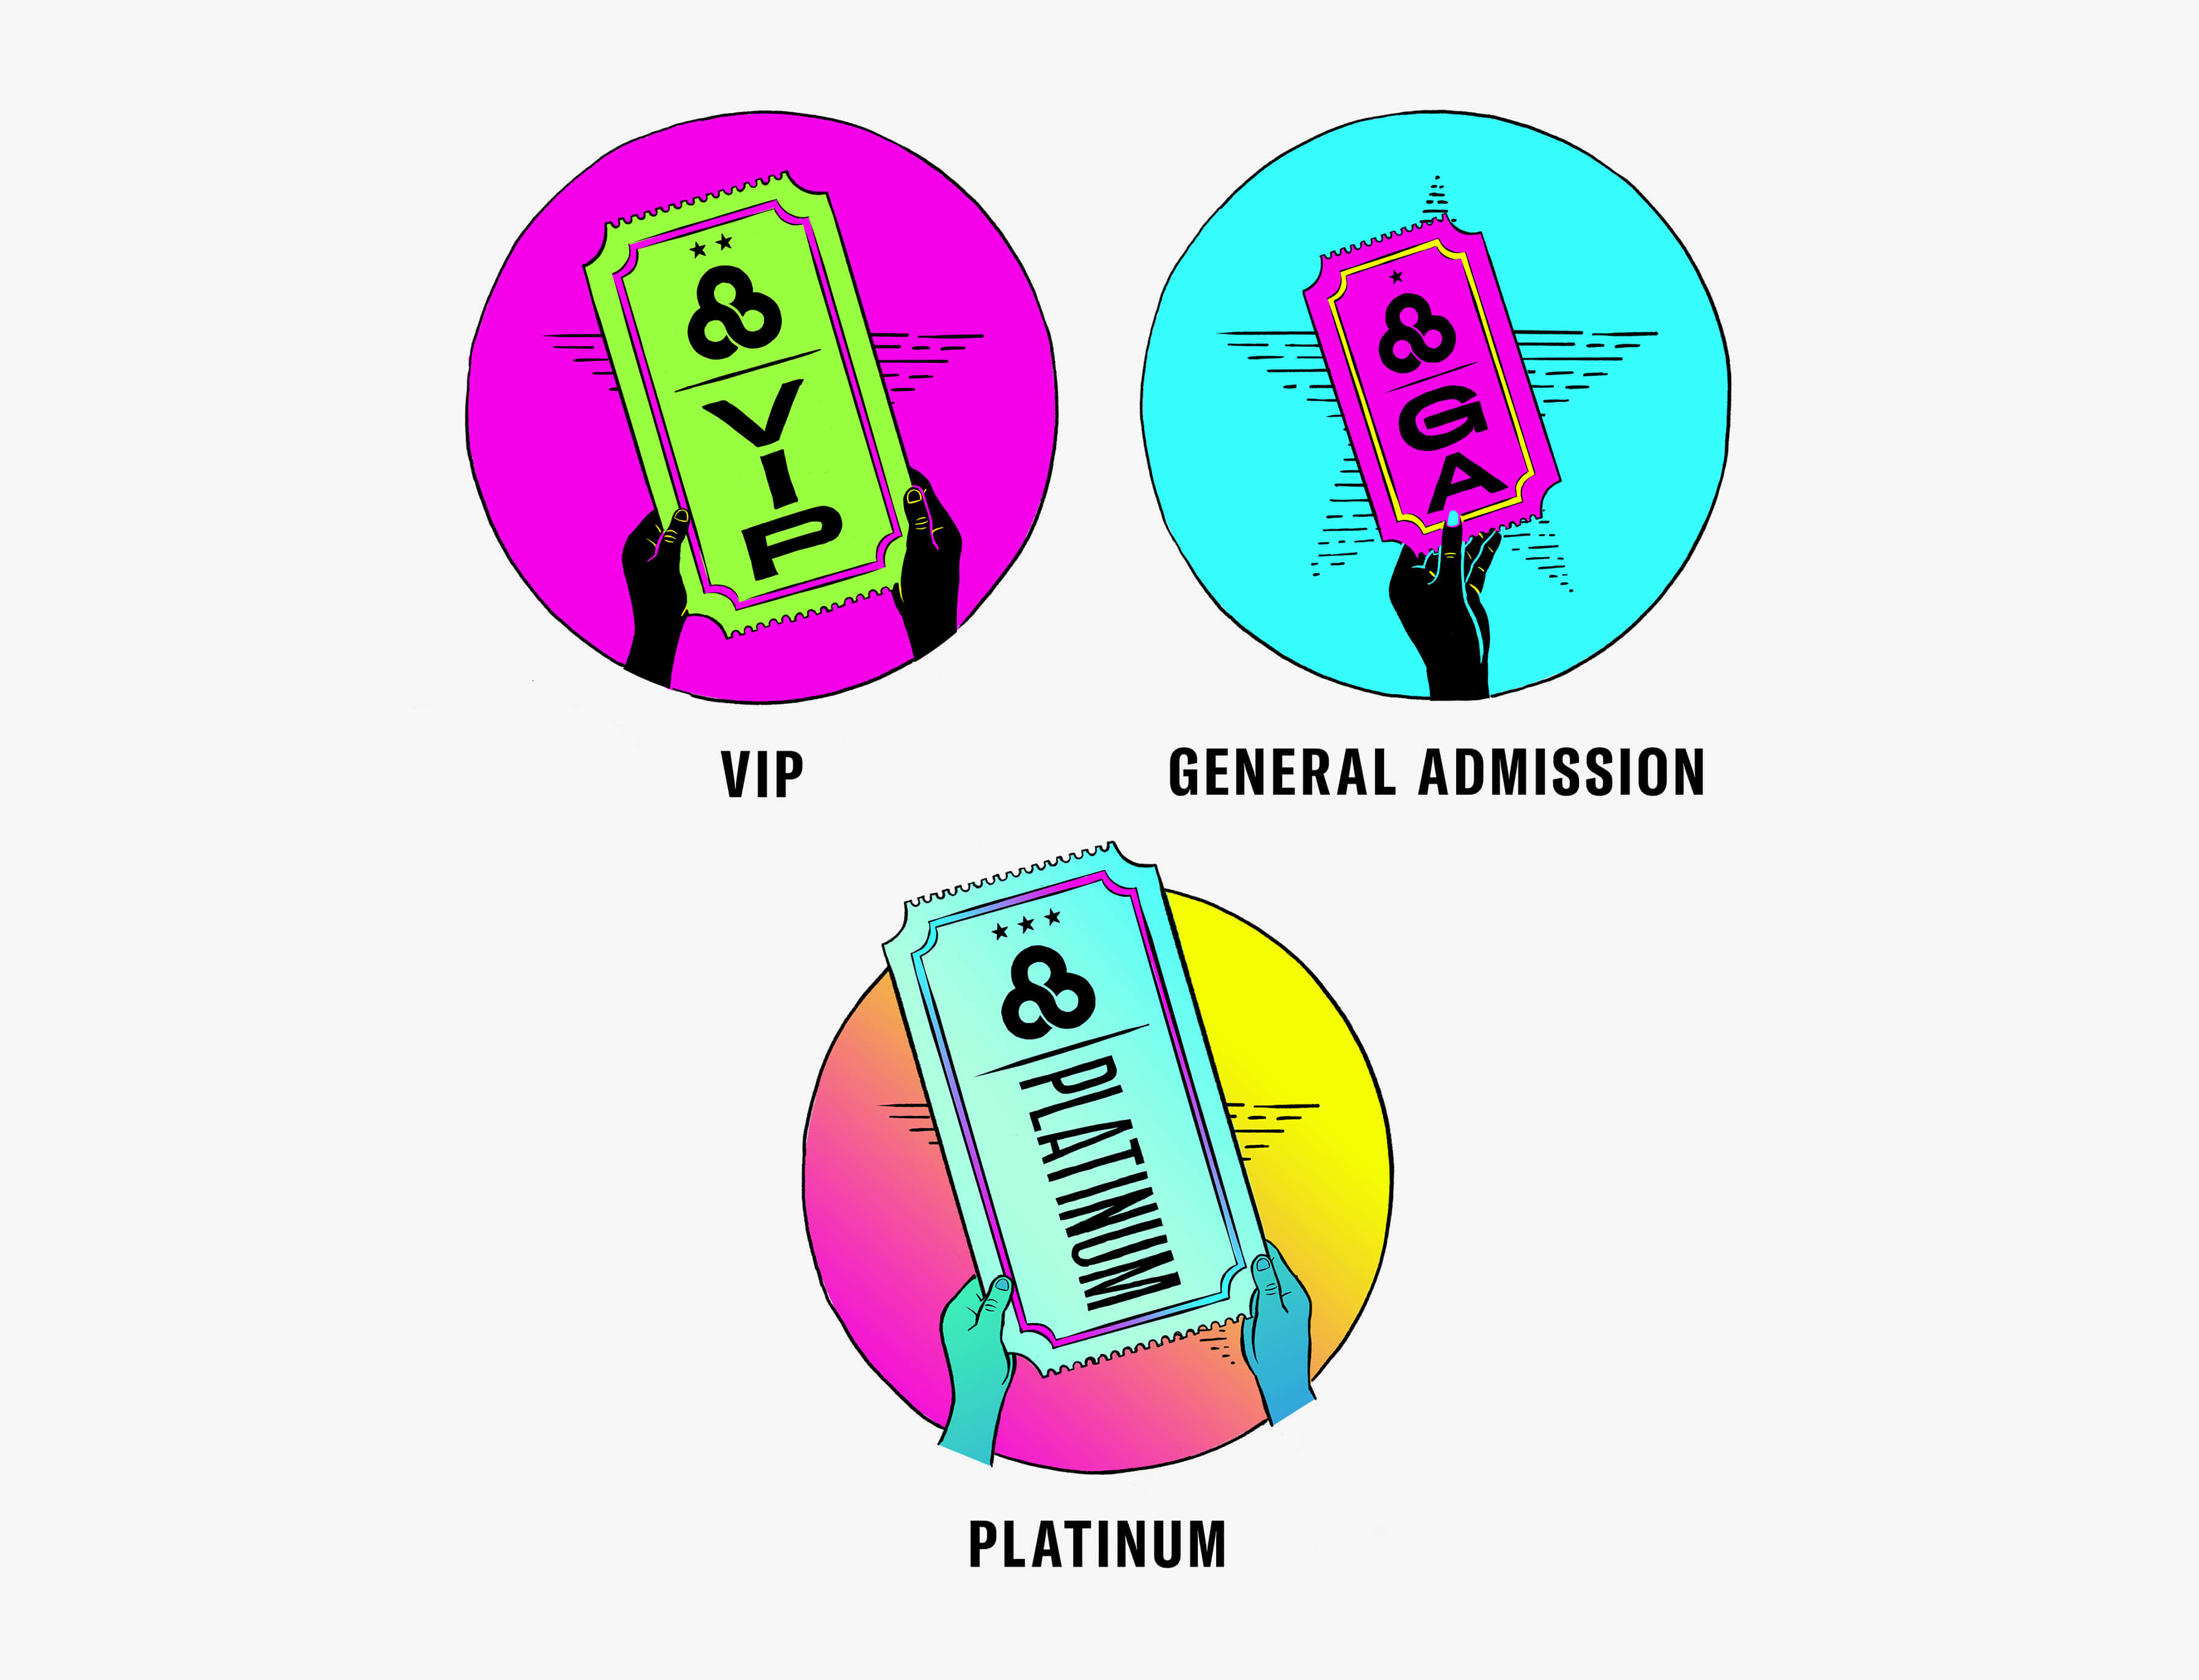 Ticket Category Icons designed and illustrated for different Bonnaroo ticket levels including General Admission, VIP, and Platinum.